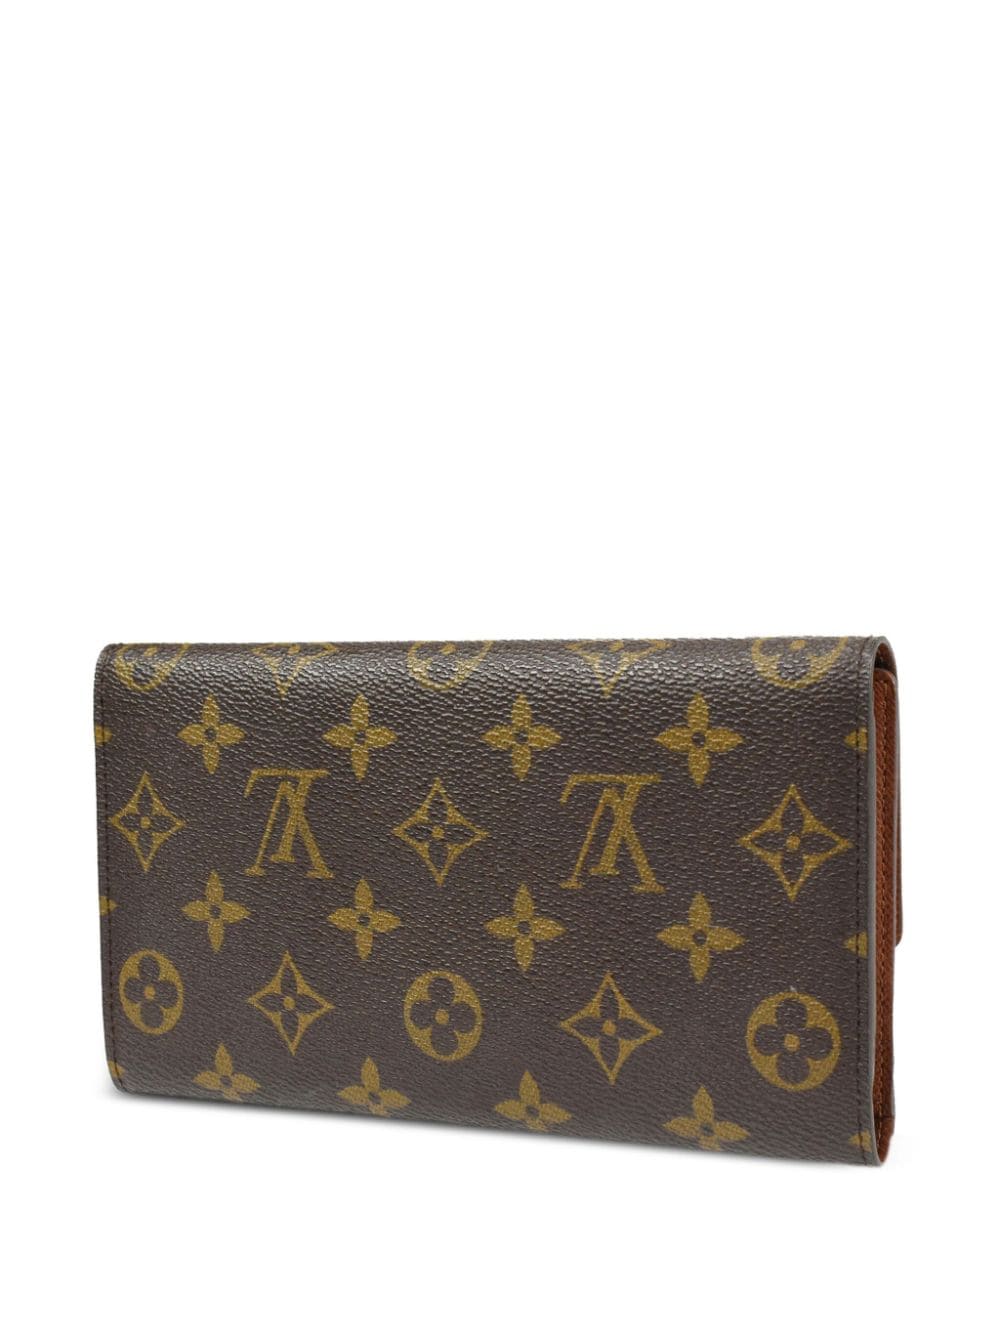 Pre-owned Louis Vuitton 2001 Portefeuille Continental Wallet In Brown